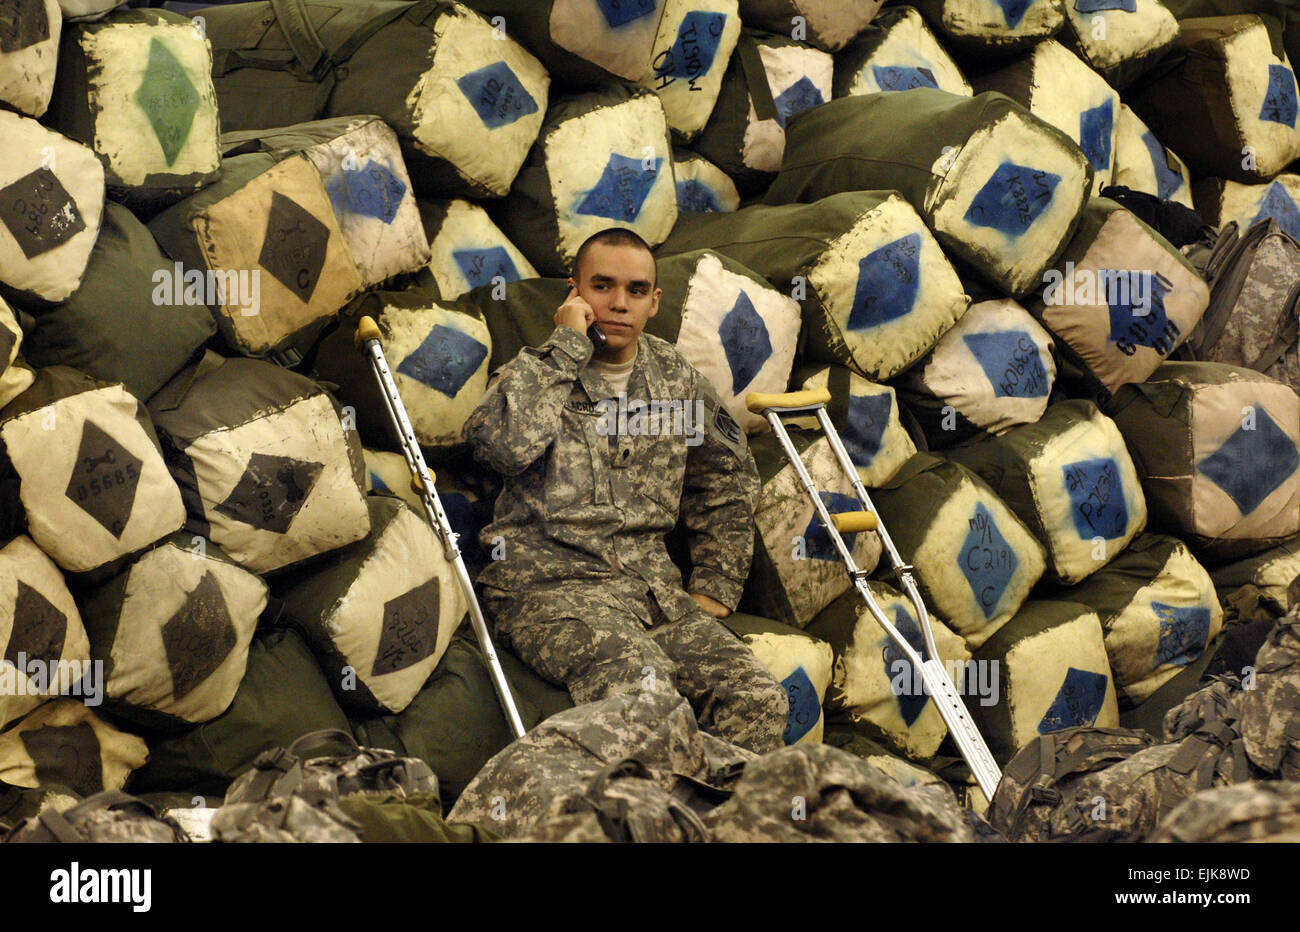 U.S. Army Spc. Maximo Delacruz, of the 76th Brigade Combat Team, sits out during a going away ceremony Jan. 2, 2008, at the RCA Dome in Indianapolis, Ind. The Indiana National Guard is preparing to deploy its largest amount of Soldiers since World War II with more than 3,400 Soldiers scheduled to depart for Iraq to serve during their 12-month rotation.  Staff Sgt. Russell Klika Stock Photo